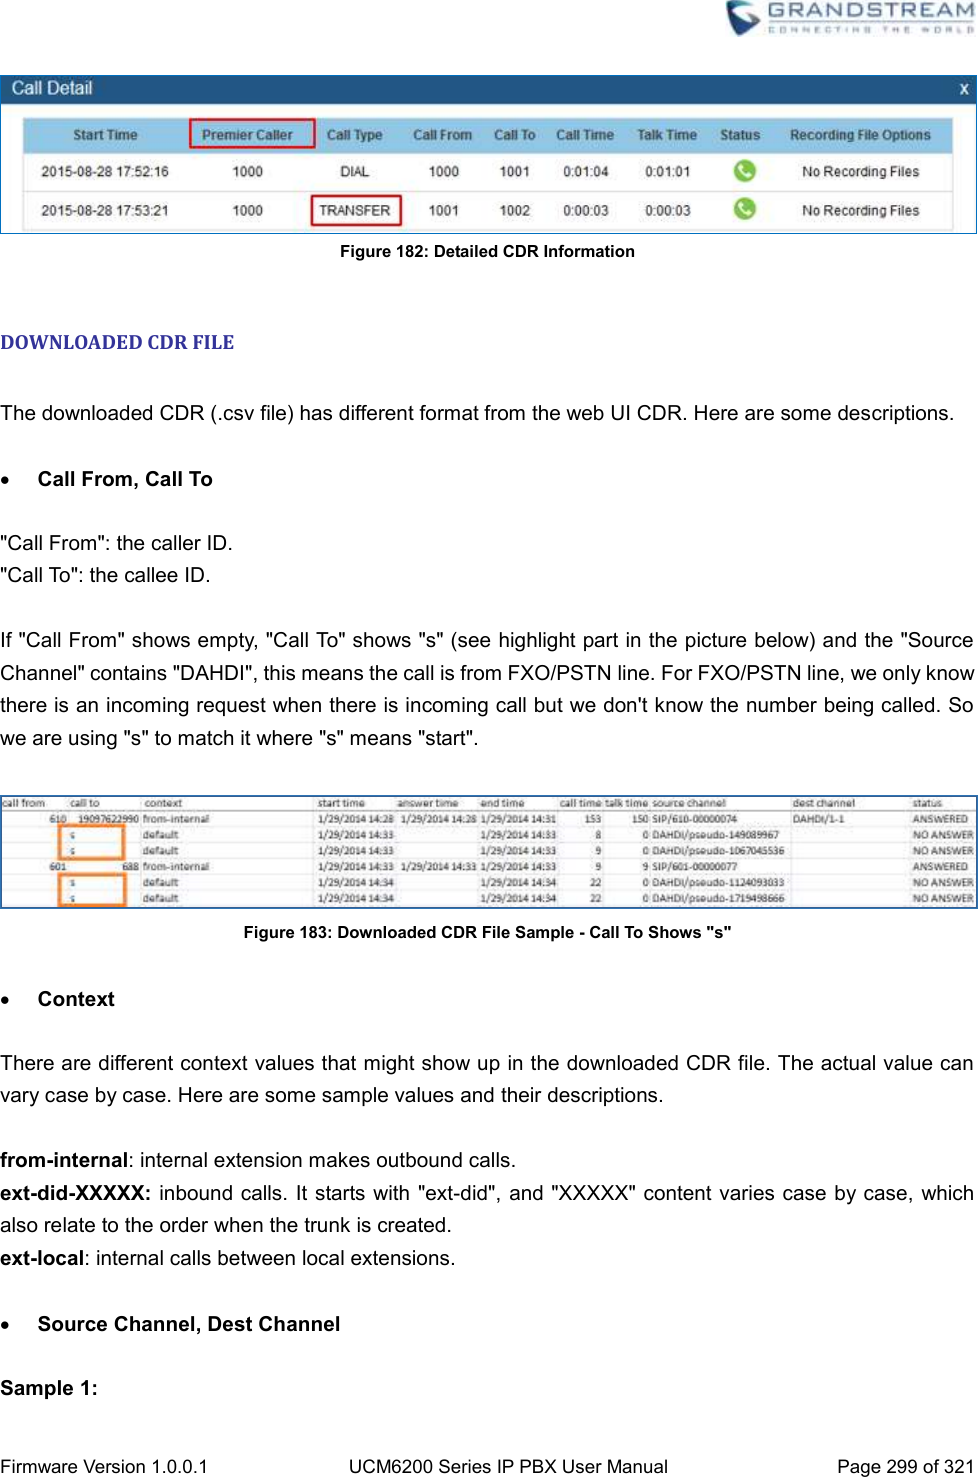  Firmware Version 1.0.0.1 UCM6200 Series IP PBX User Manual Page 299 of 321     Figure 182: Detailed CDR Information  DOWNLOADED CDR FILE  The downloaded CDR (.csv file) has different format from the web UI CDR. Here are some descriptions.   Call From, Call To  &quot;Call From&quot;: the caller ID. &quot;Call To&quot;: the callee ID.  If &quot;Call From&quot; shows empty, &quot;Call To&quot; shows &quot;s&quot; (see highlight part in the picture below) and the &quot;Source Channel&quot; contains &quot;DAHDI&quot;, this means the call is from FXO/PSTN line. For FXO/PSTN line, we only know there is an incoming request when there is incoming call but we don&apos;t know the number being called. So we are using &quot;s&quot; to match it where &quot;s&quot; means &quot;start&quot;.   Figure 183: Downloaded CDR File Sample - Call To Shows &quot;s&quot;   Context  There are different context values that might show up in the downloaded CDR file. The actual value can vary case by case. Here are some sample values and their descriptions.  from-internal: internal extension makes outbound calls. ext-did-XXXXX: inbound calls. It starts with &quot;ext-did&quot;, and &quot;XXXXX&quot; content varies case by case,  which also relate to the order when the trunk is created. ext-local: internal calls between local extensions.   Source Channel, Dest Channel  Sample 1: 